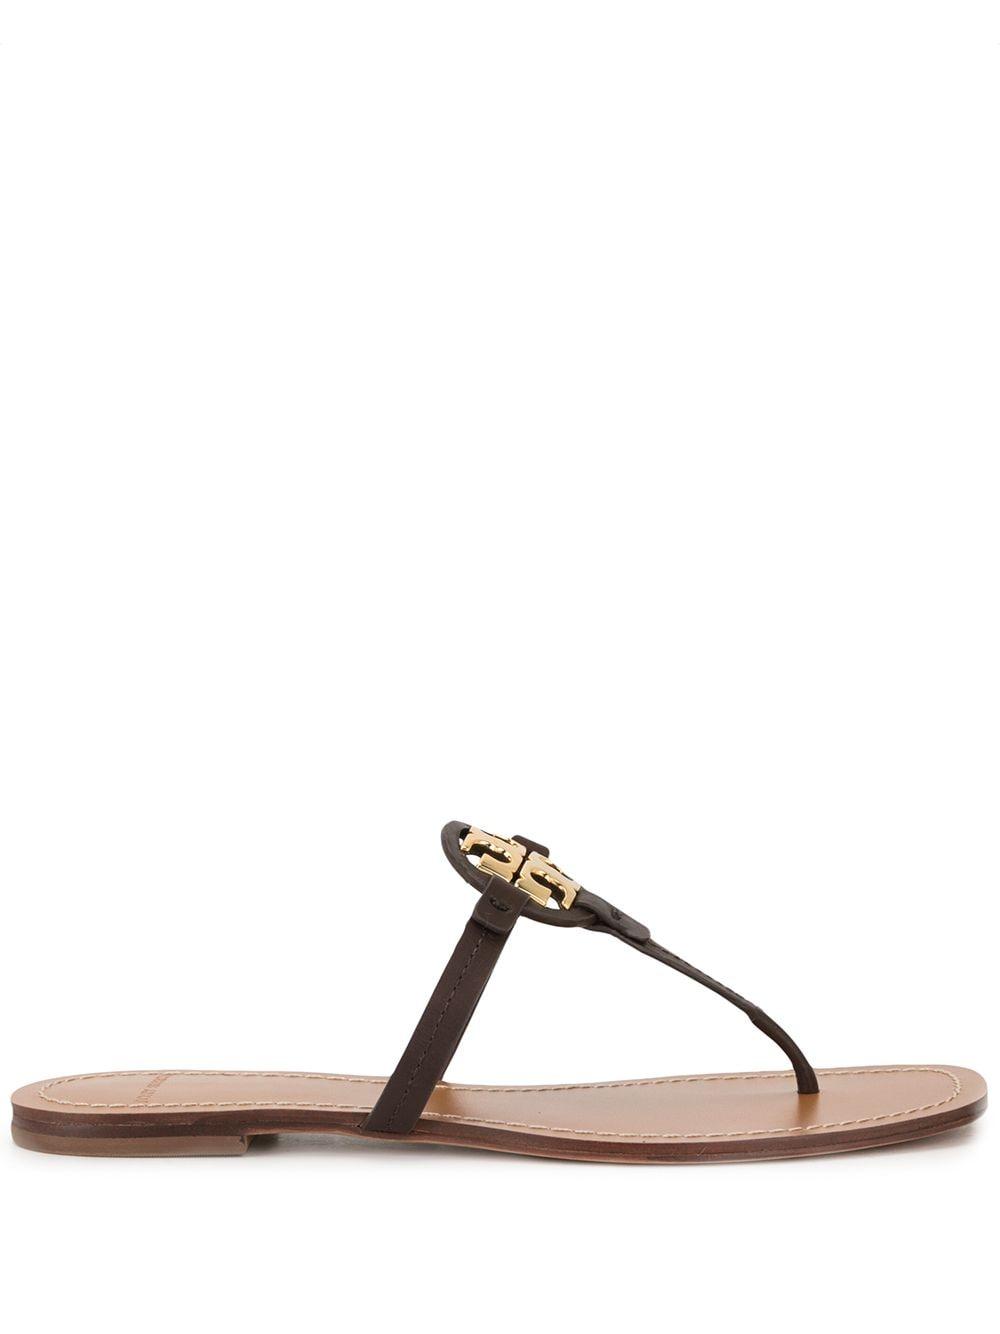 Tory Burch Leather Mini Miller Thong Sandals in Brown - Lyst